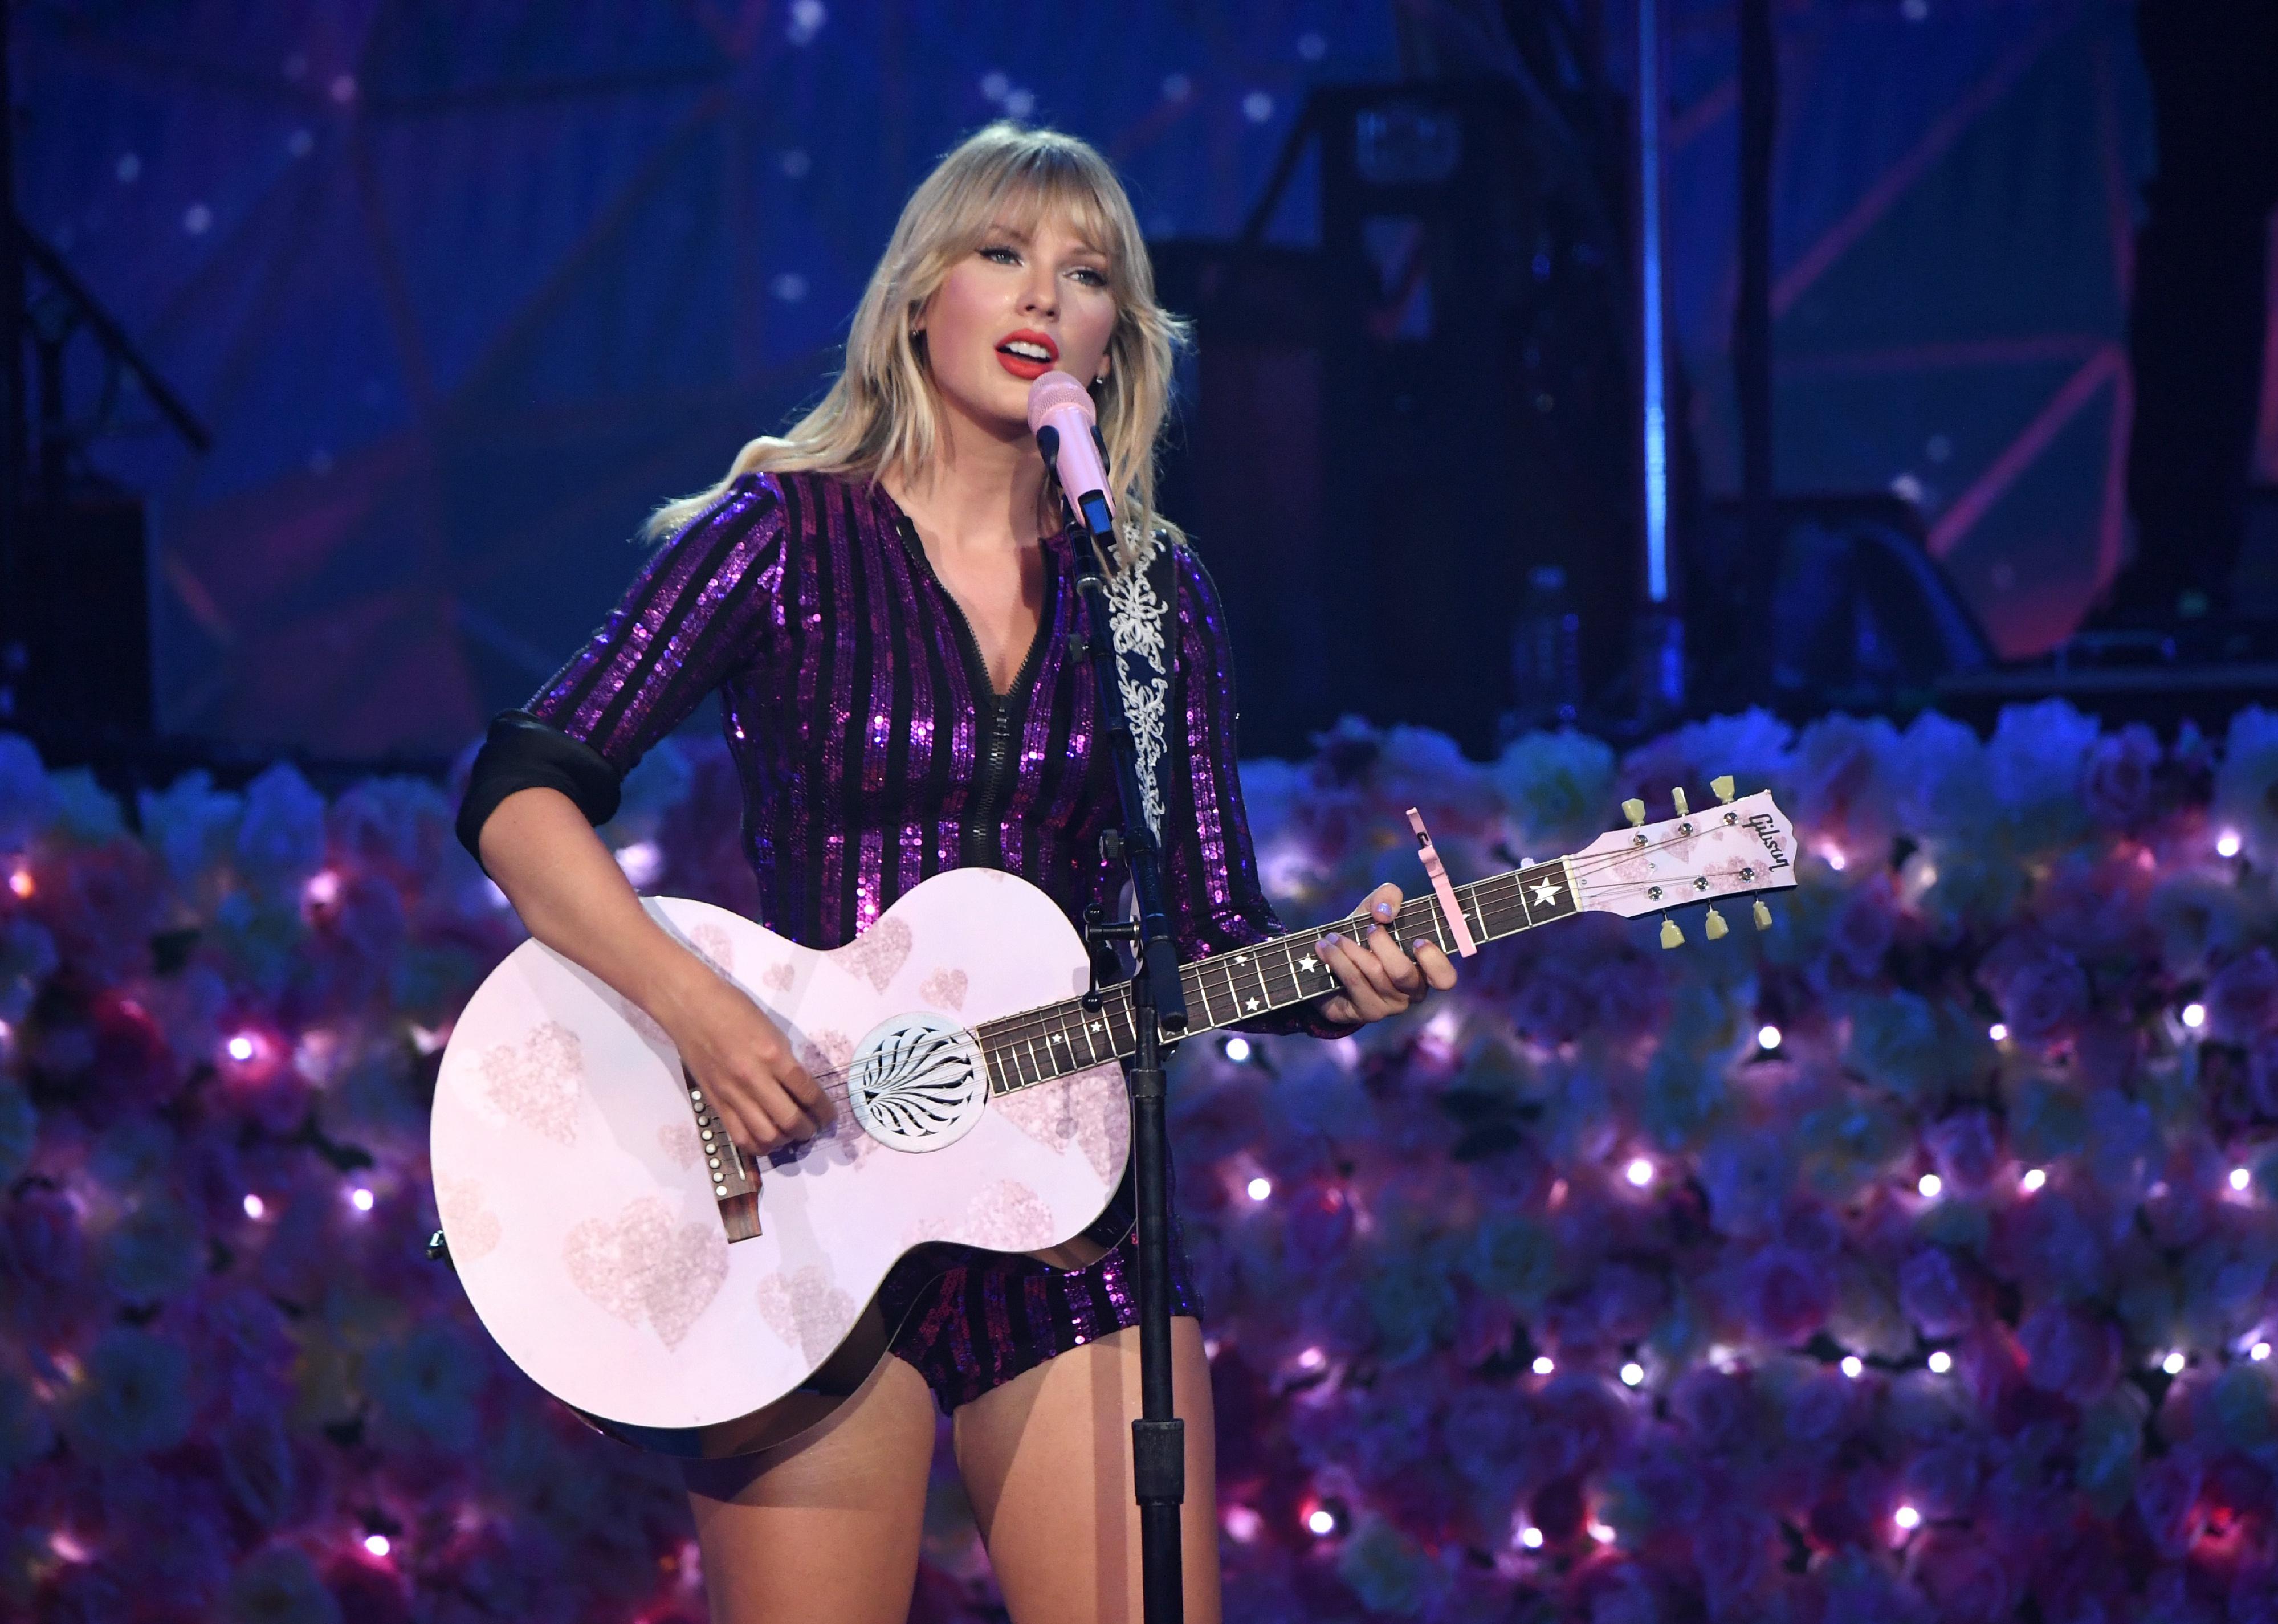 Taylor Swift in a shiny purple outfit with a pink guitar.